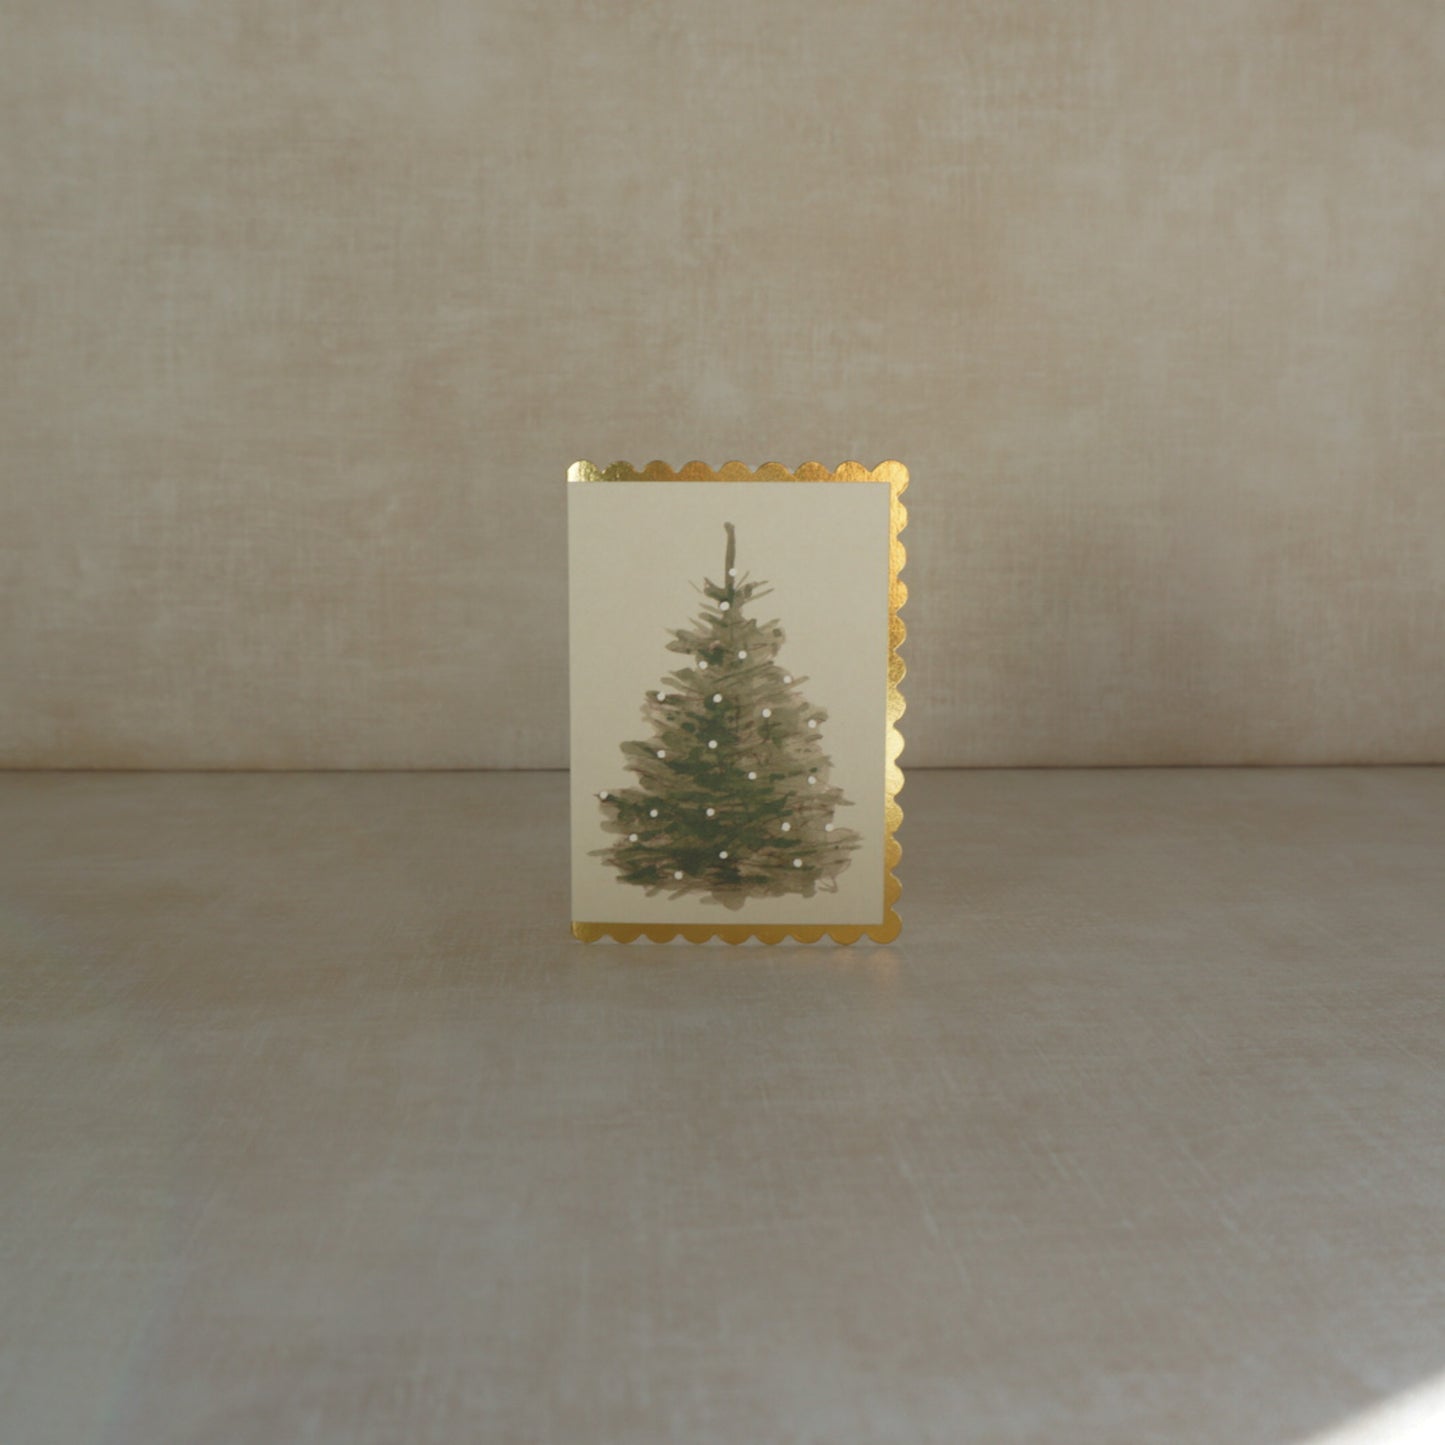 Festive and charming mini Christmas tree card with gold scalloped edge detail